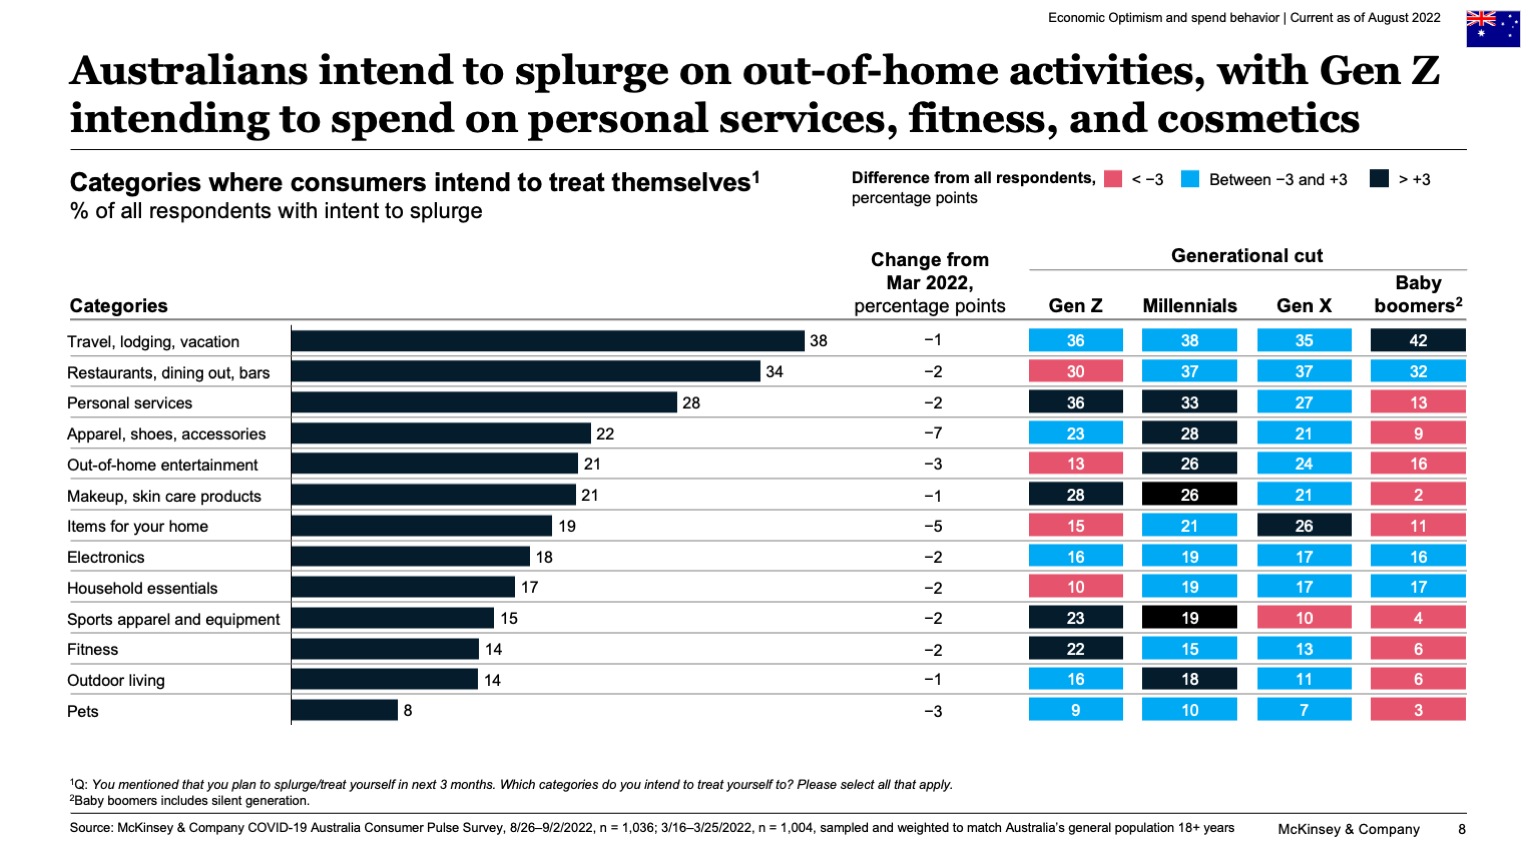 Australians intend to splurge on out-of-home activities, with Gen Z intending to spend on personal services, fitness, and cosmetics